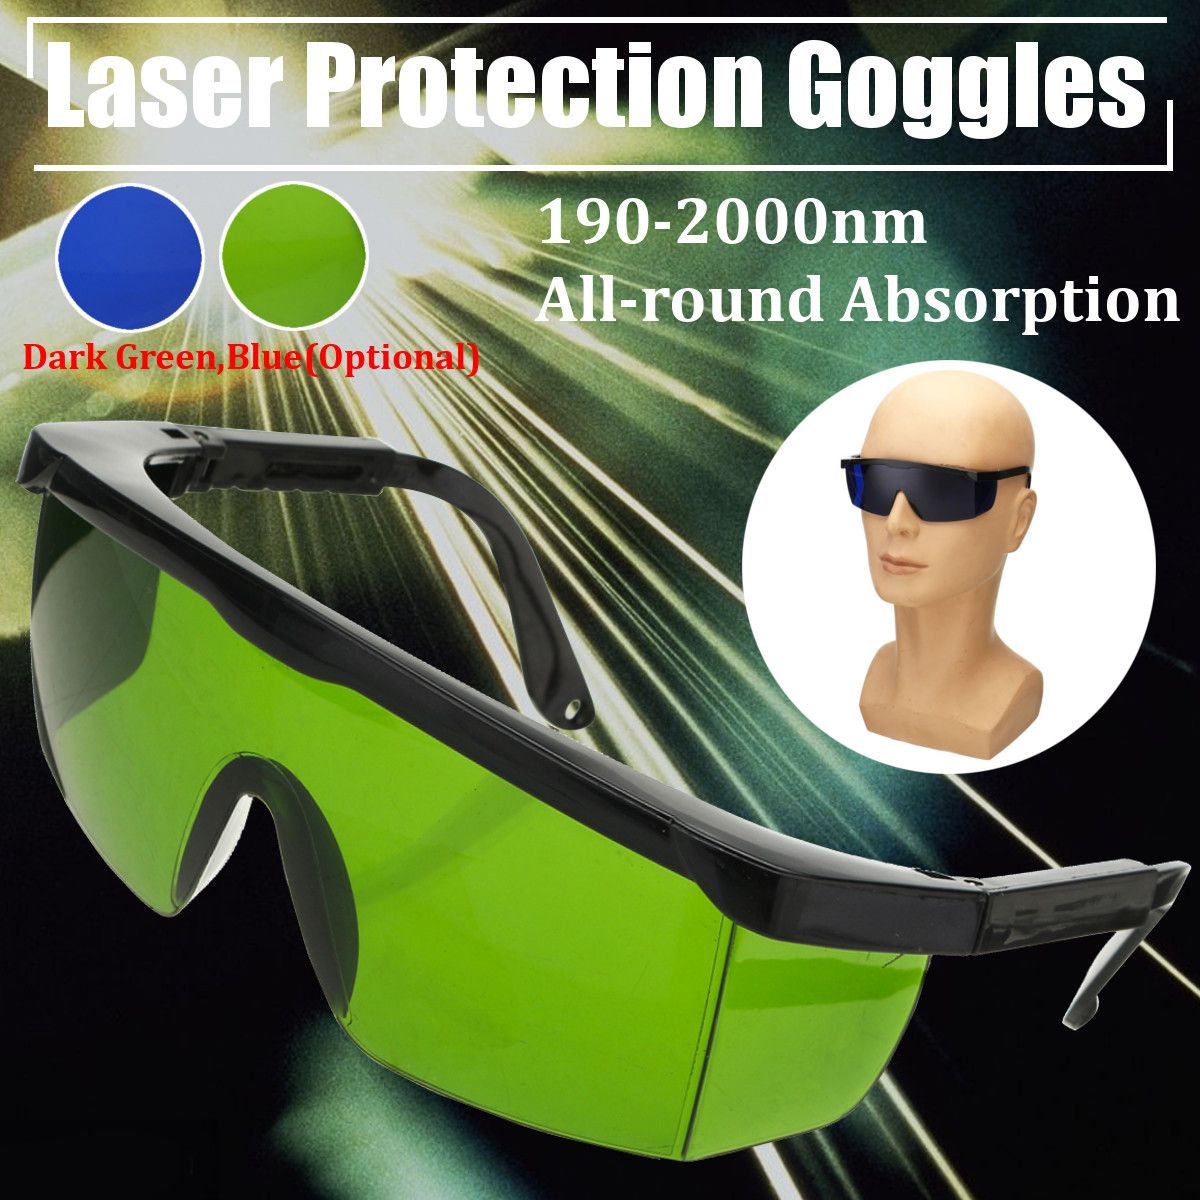 Pro-Laser-Protection-Goggles-Protective-Safety-Glasses-IPL-OD4D-190nm-2000nm-Laser-Goggles-1424199